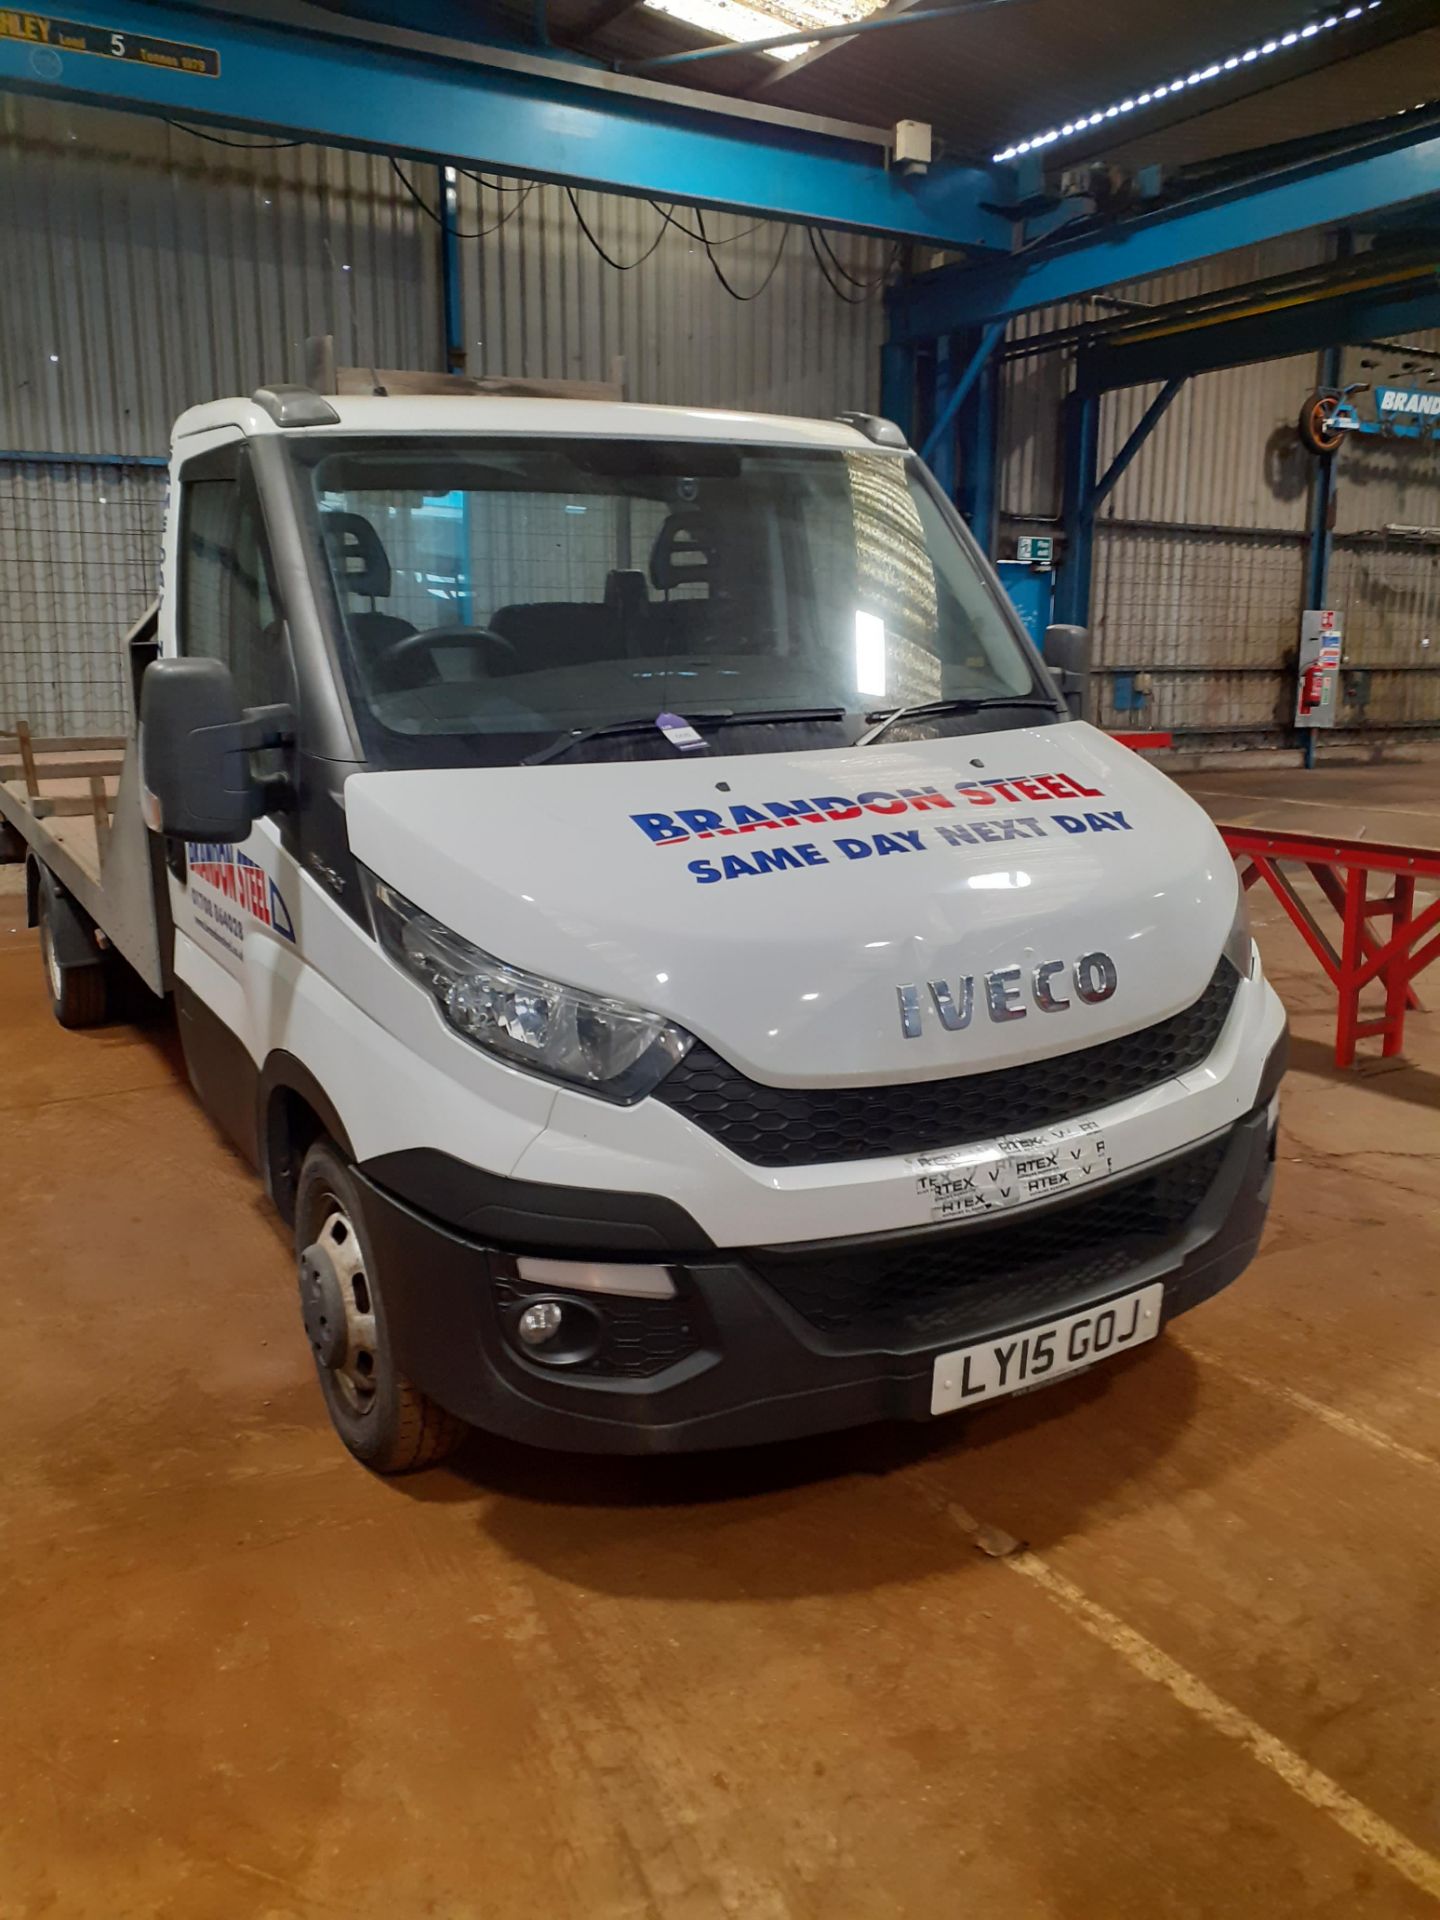 Iveco Daily 35-150 Flat Bed Truck, bed length 4.85 m, Registration LY15 GOJ, Date of Registration